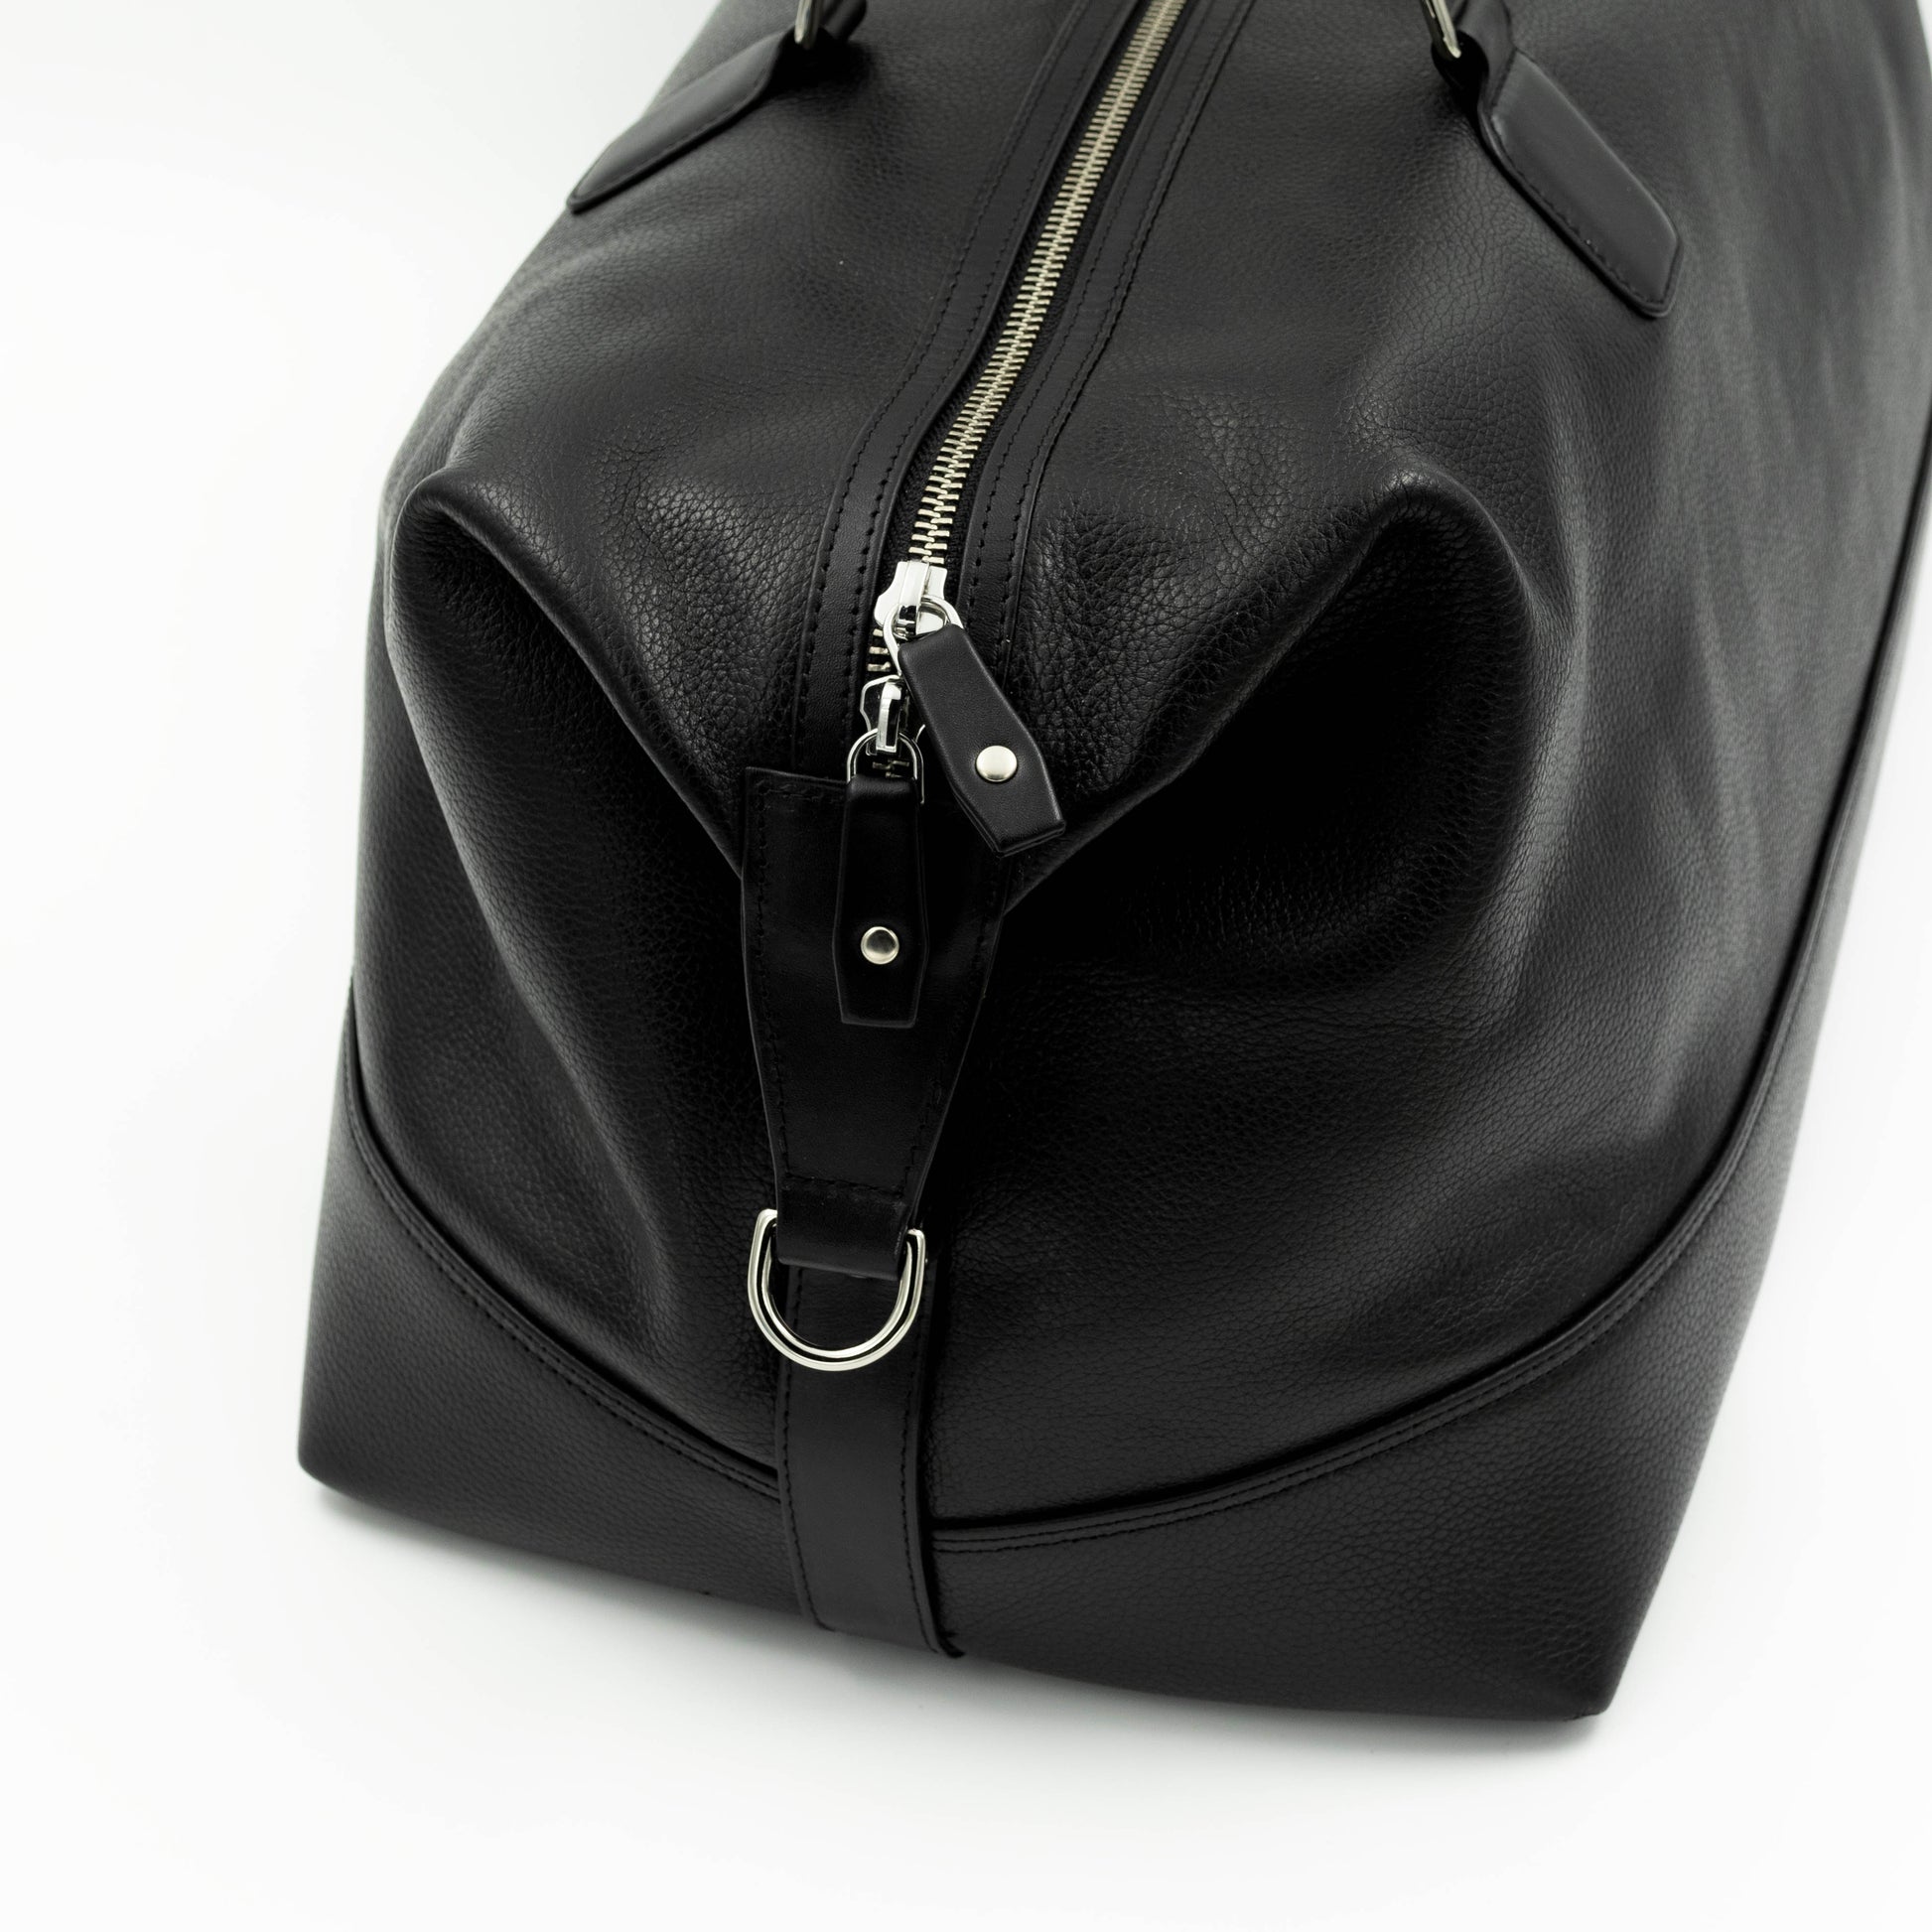 The side of the bag has a D Ring for shoulder strap attachment. 